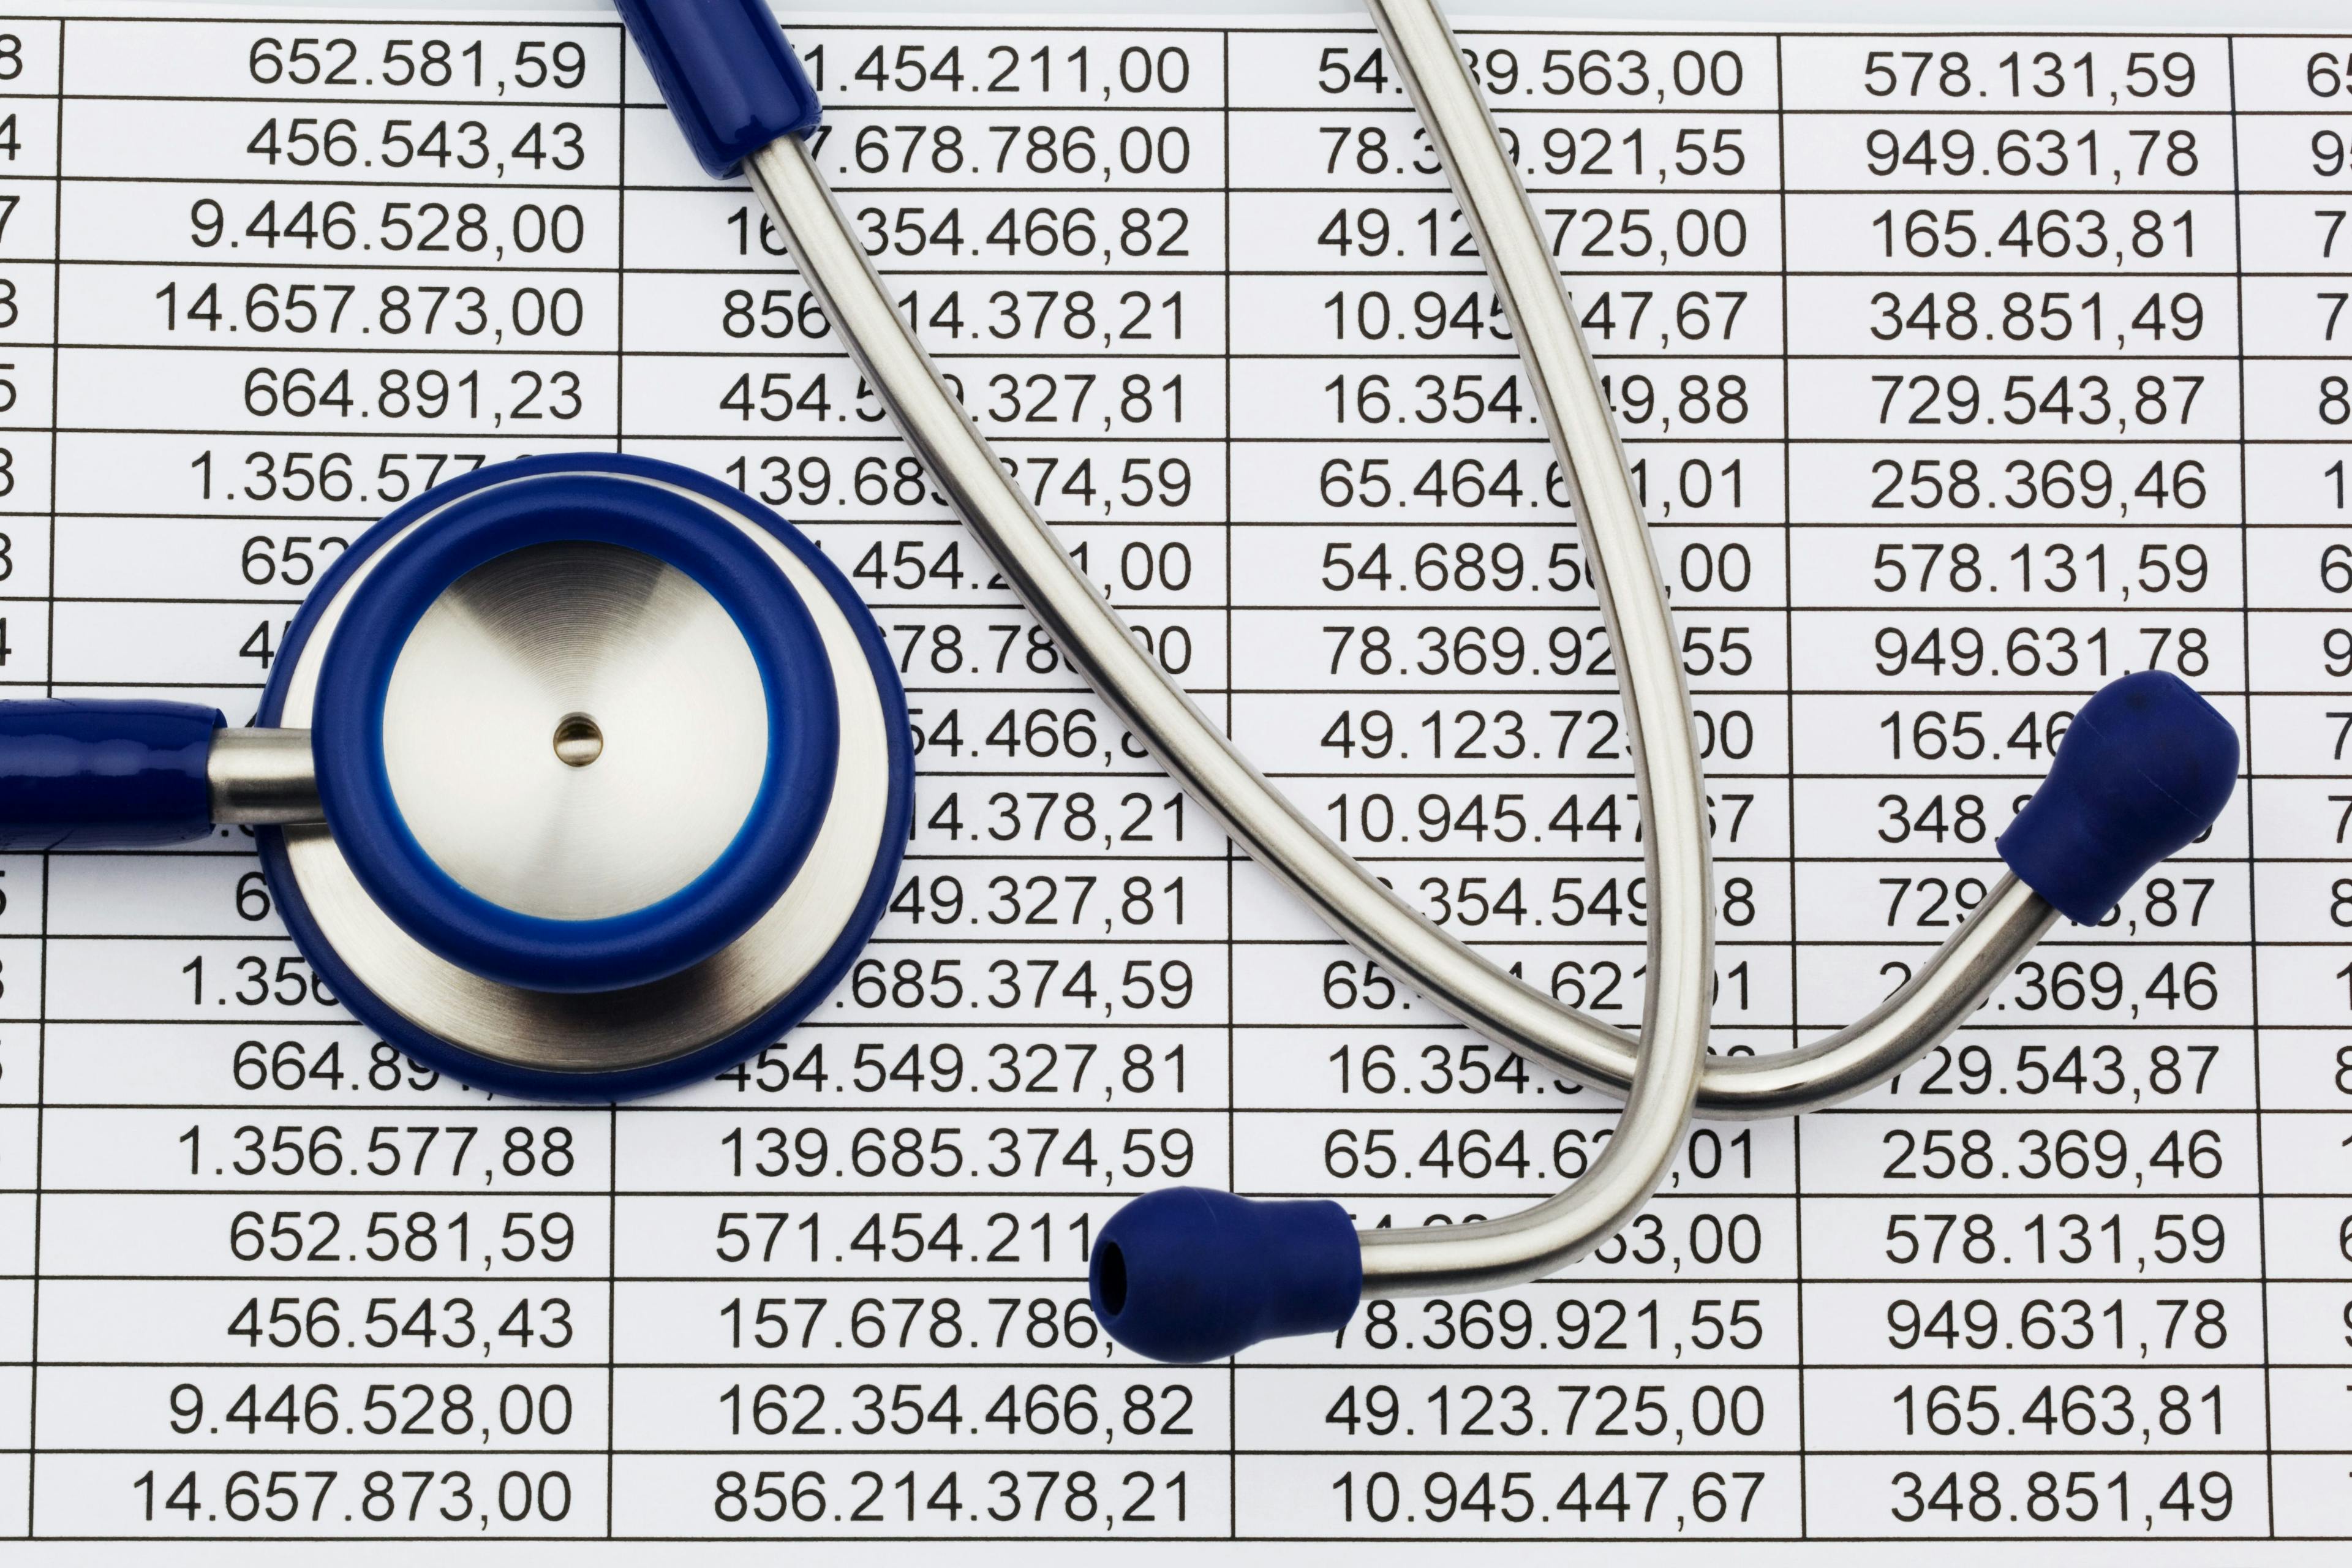 Should physicians use 457(b) as a tax saving vehicle?